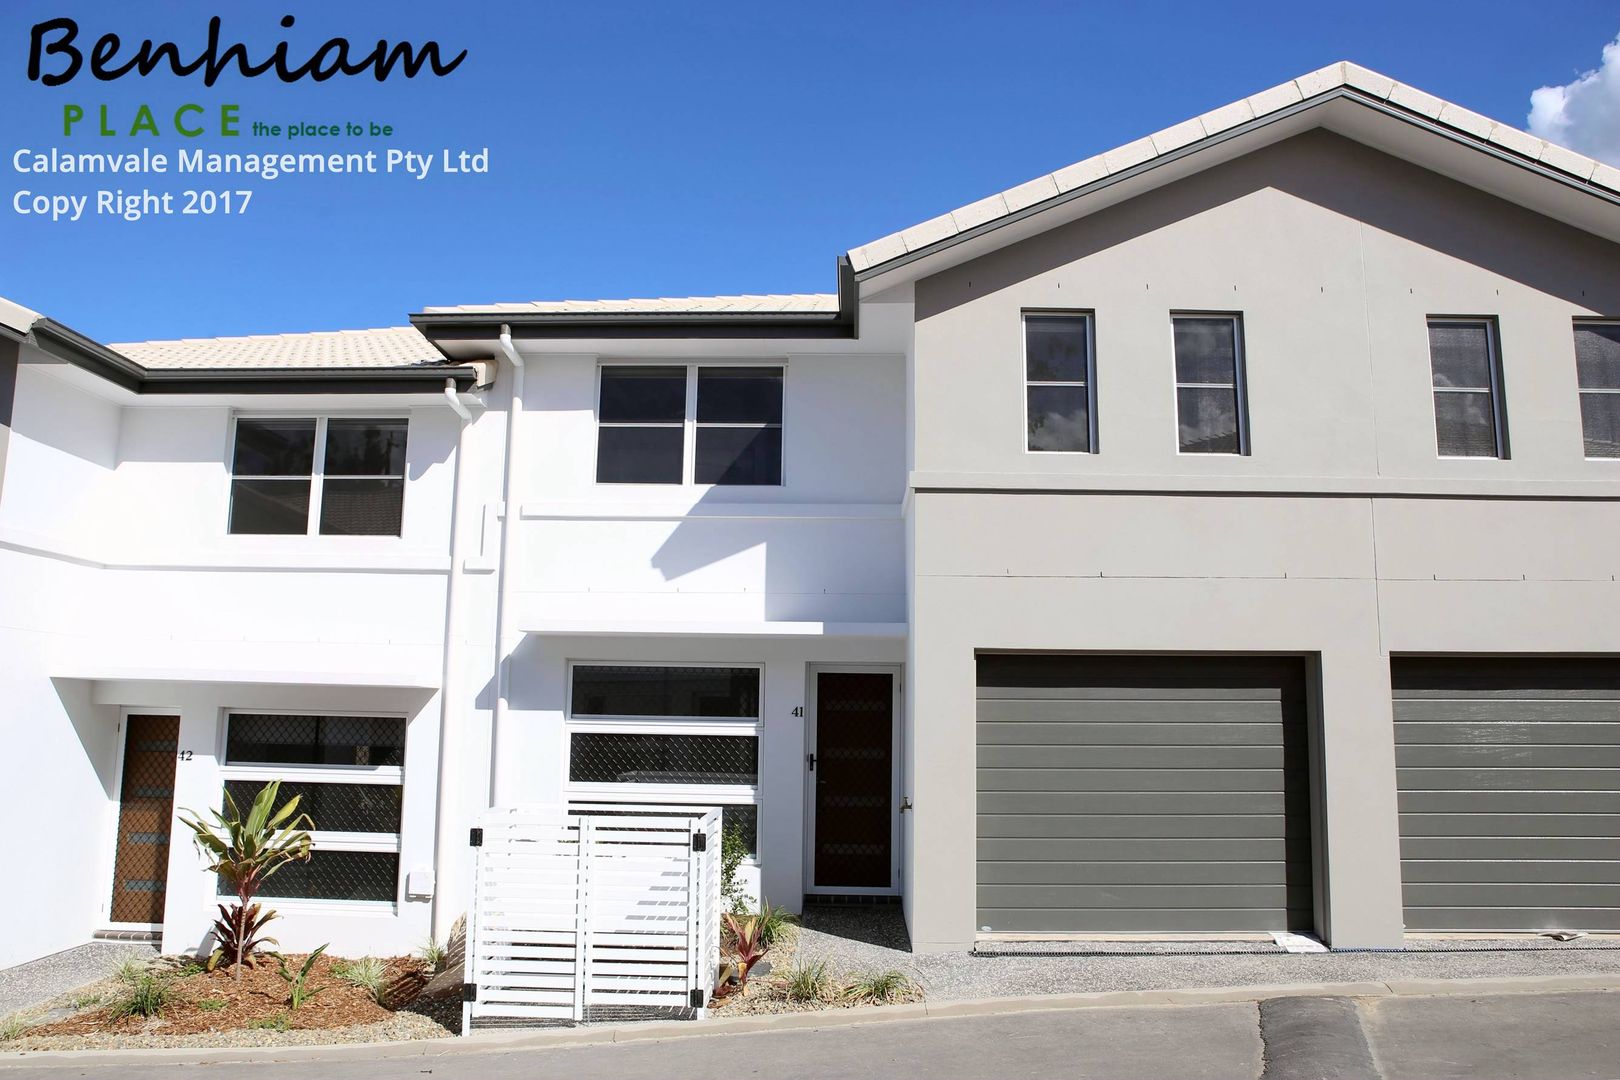 NEW Fully Furnished Townhouse at Benhiam Street, Calamvale QLD 4116, Image 1